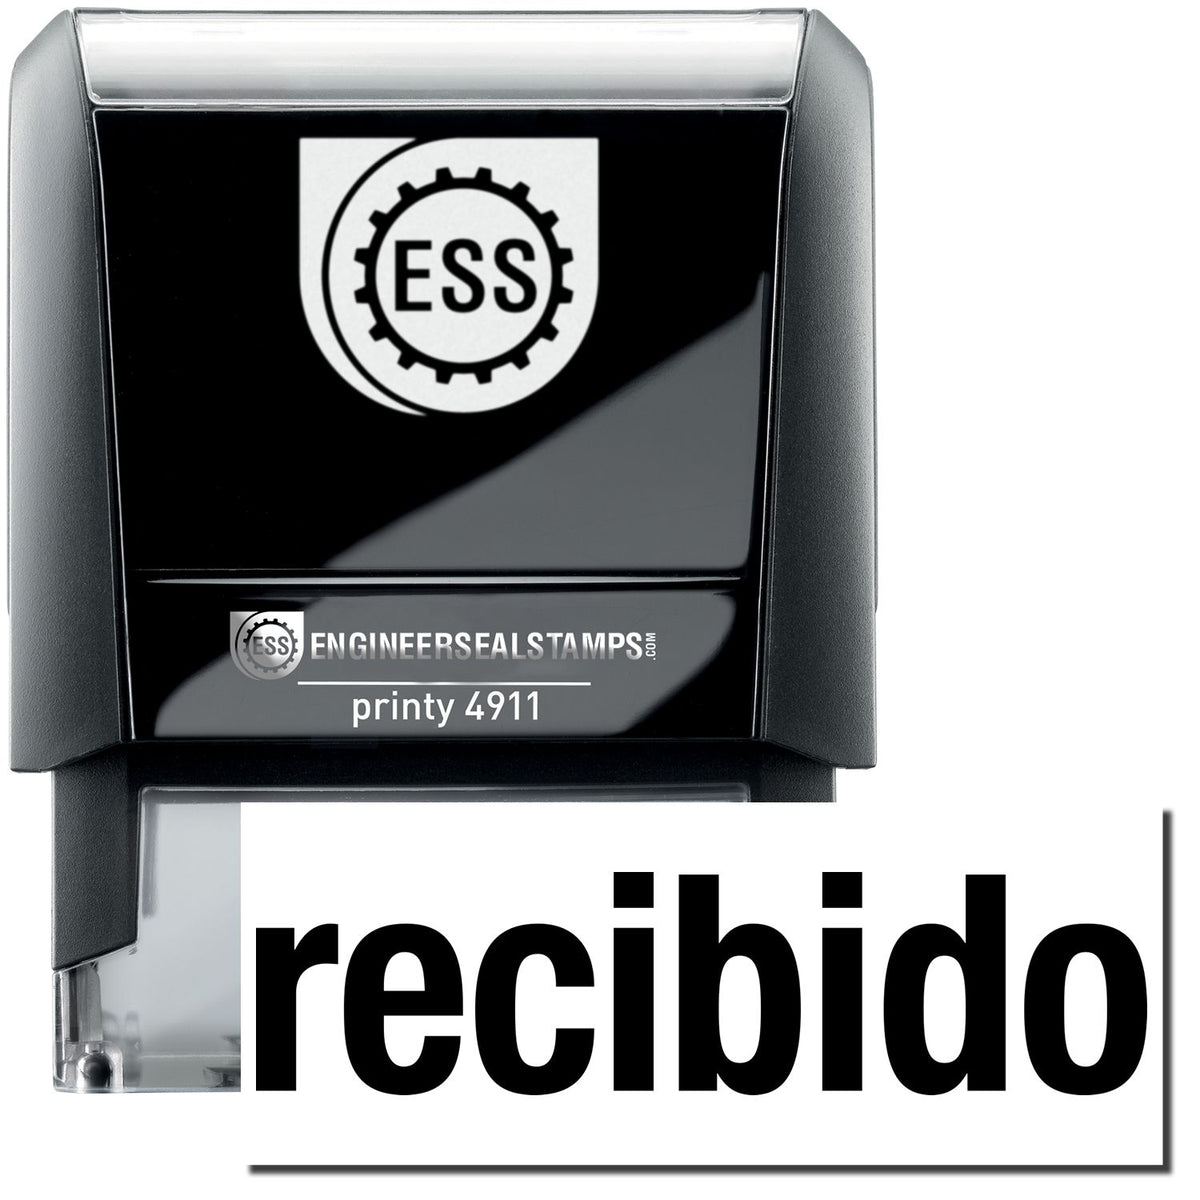 A self-inking stamp with a stamped image showing how the text &quot;recibido&quot; in bold font is displayed after stamping.